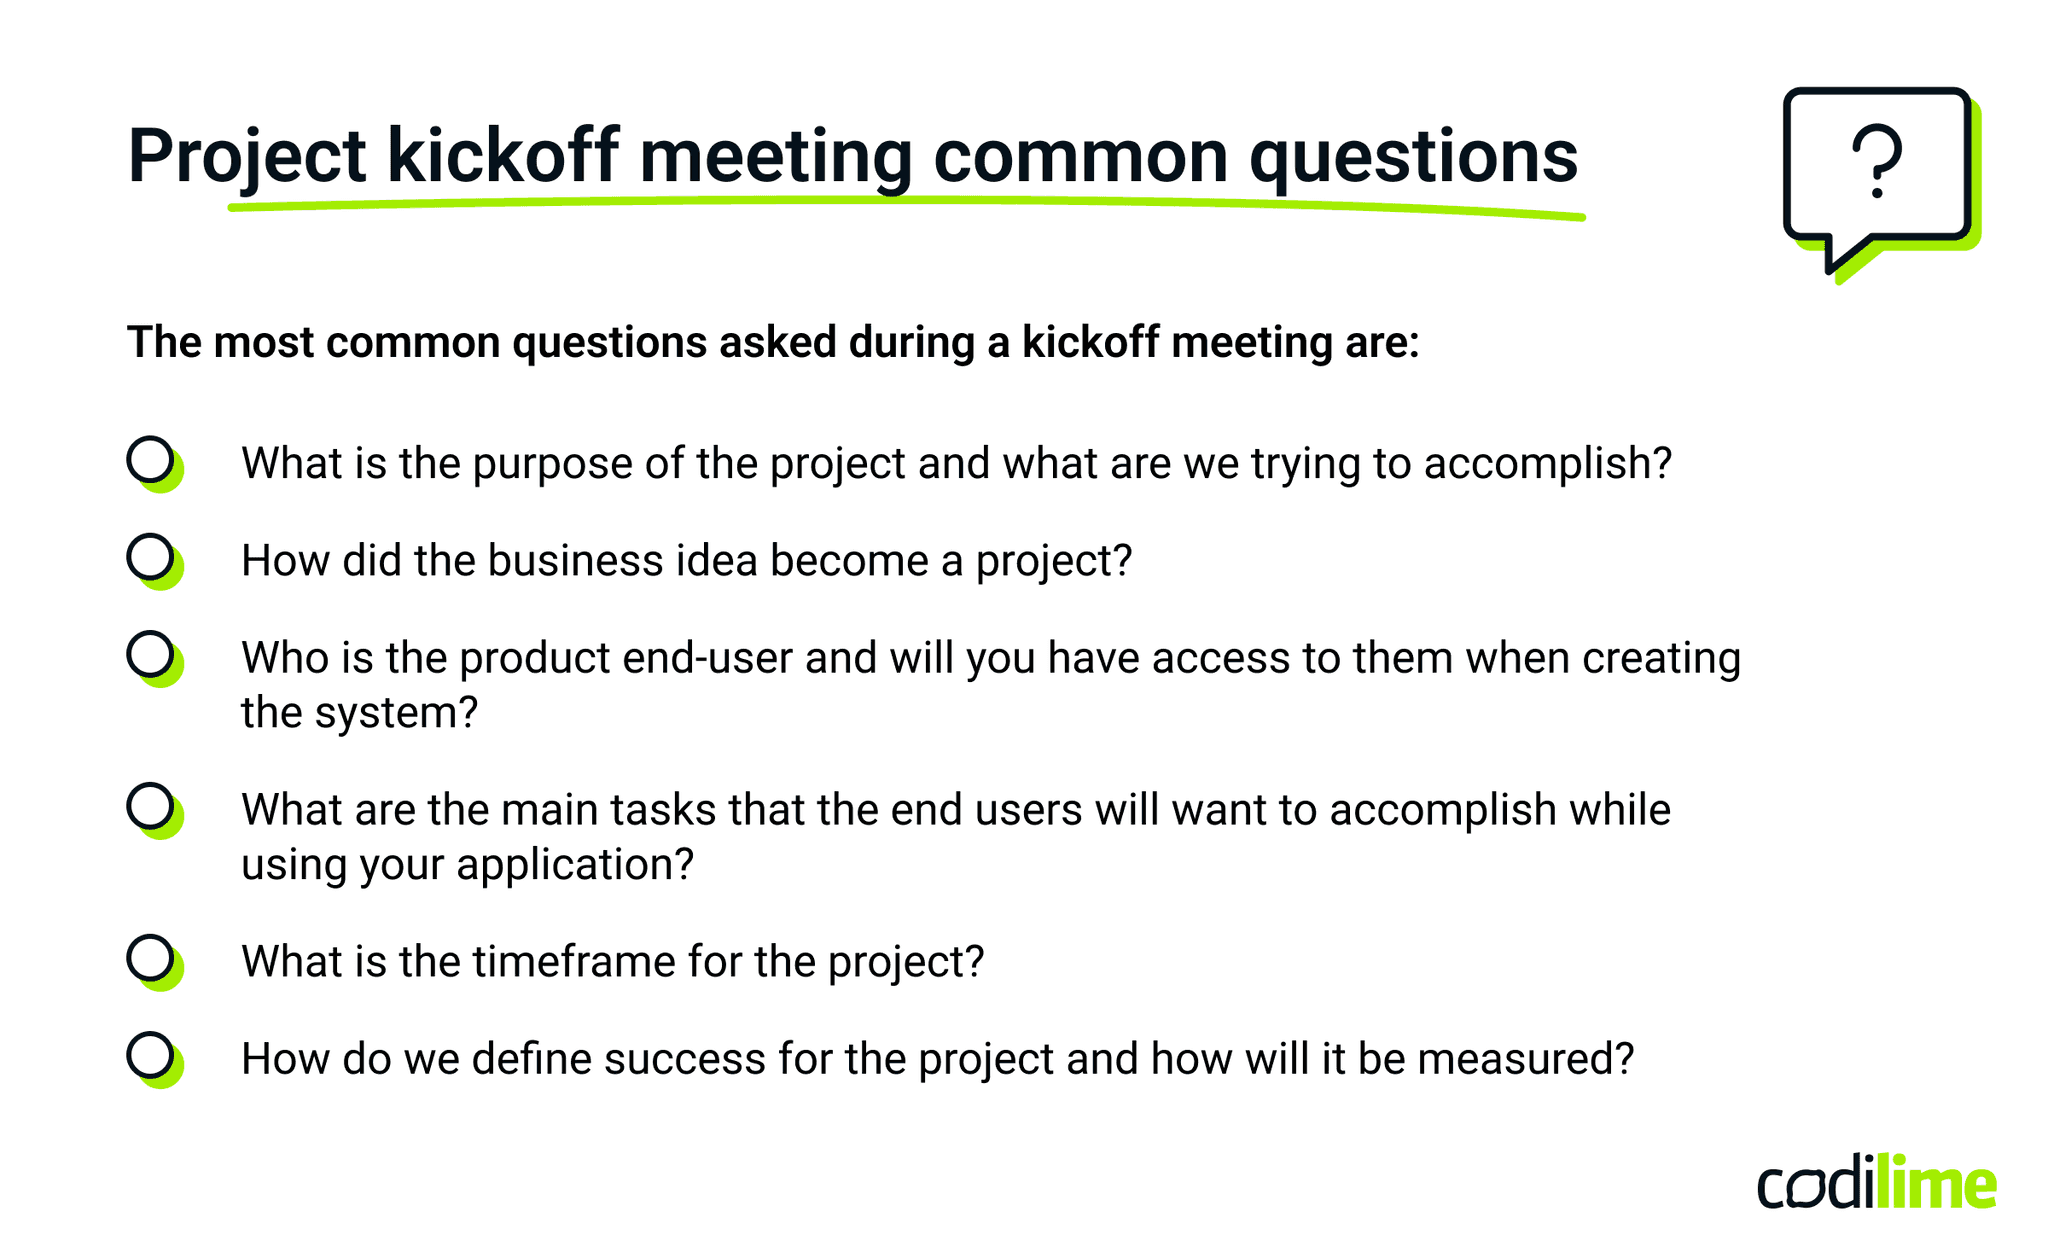 Kick-off Meeting - What, When, Why, How